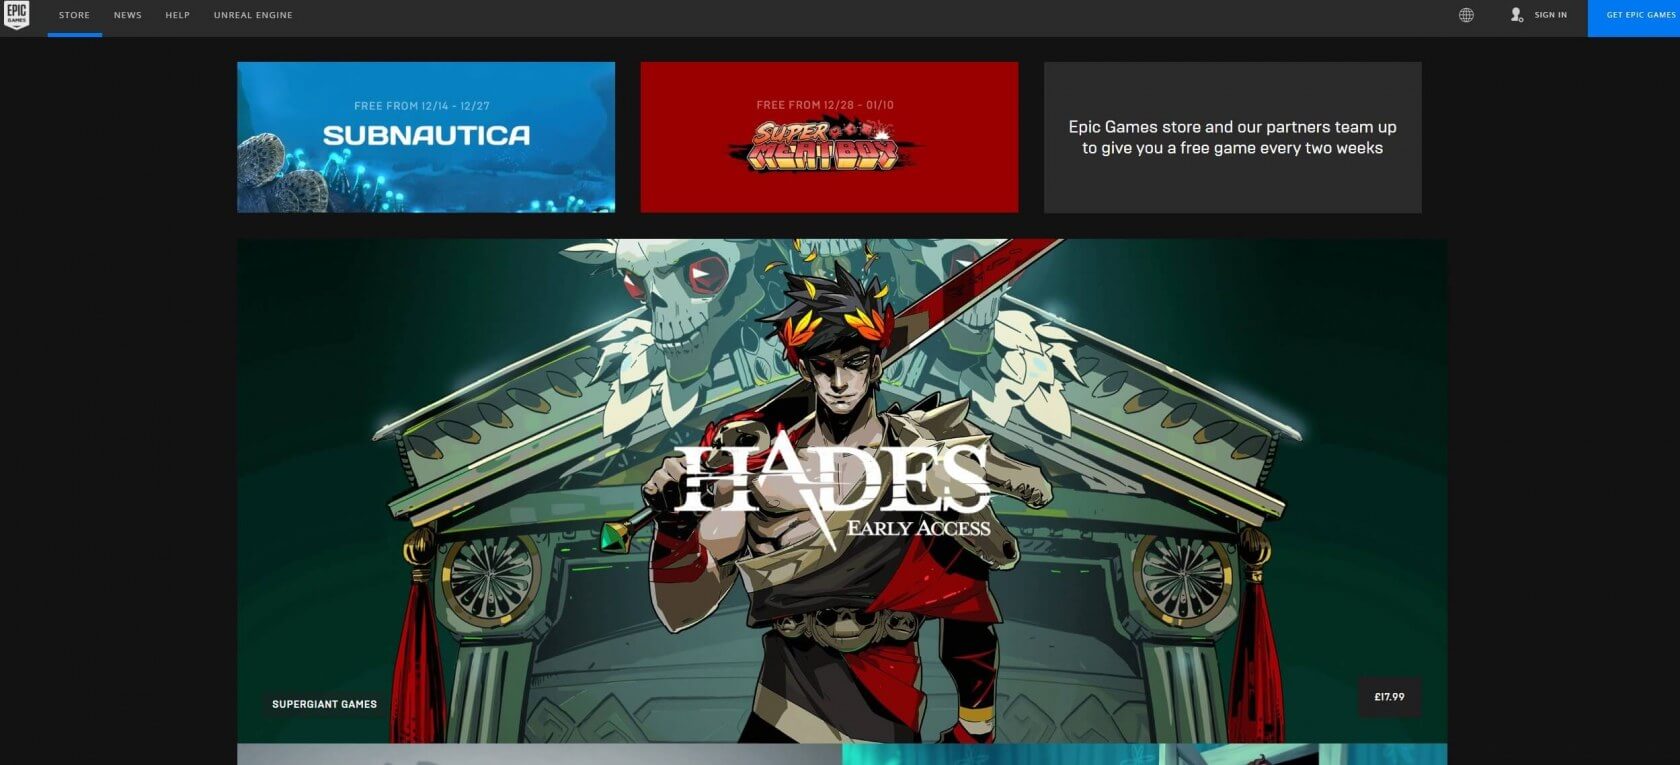 Some developers are ditching Steam in favor of the Epic Games Store